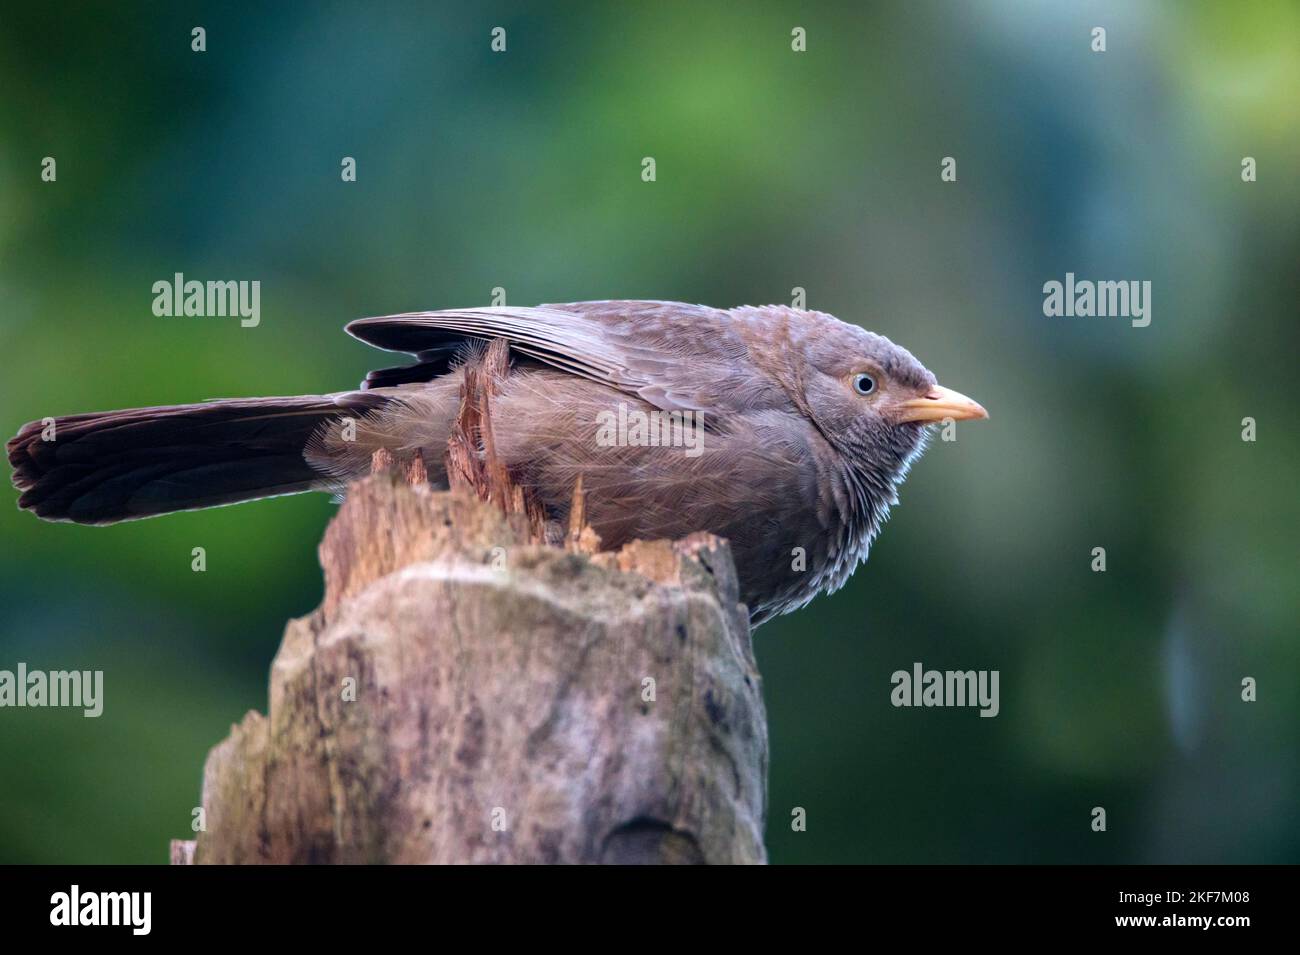 Yellow-billed babbler or Argya affinis perches on a tree Stock Photo